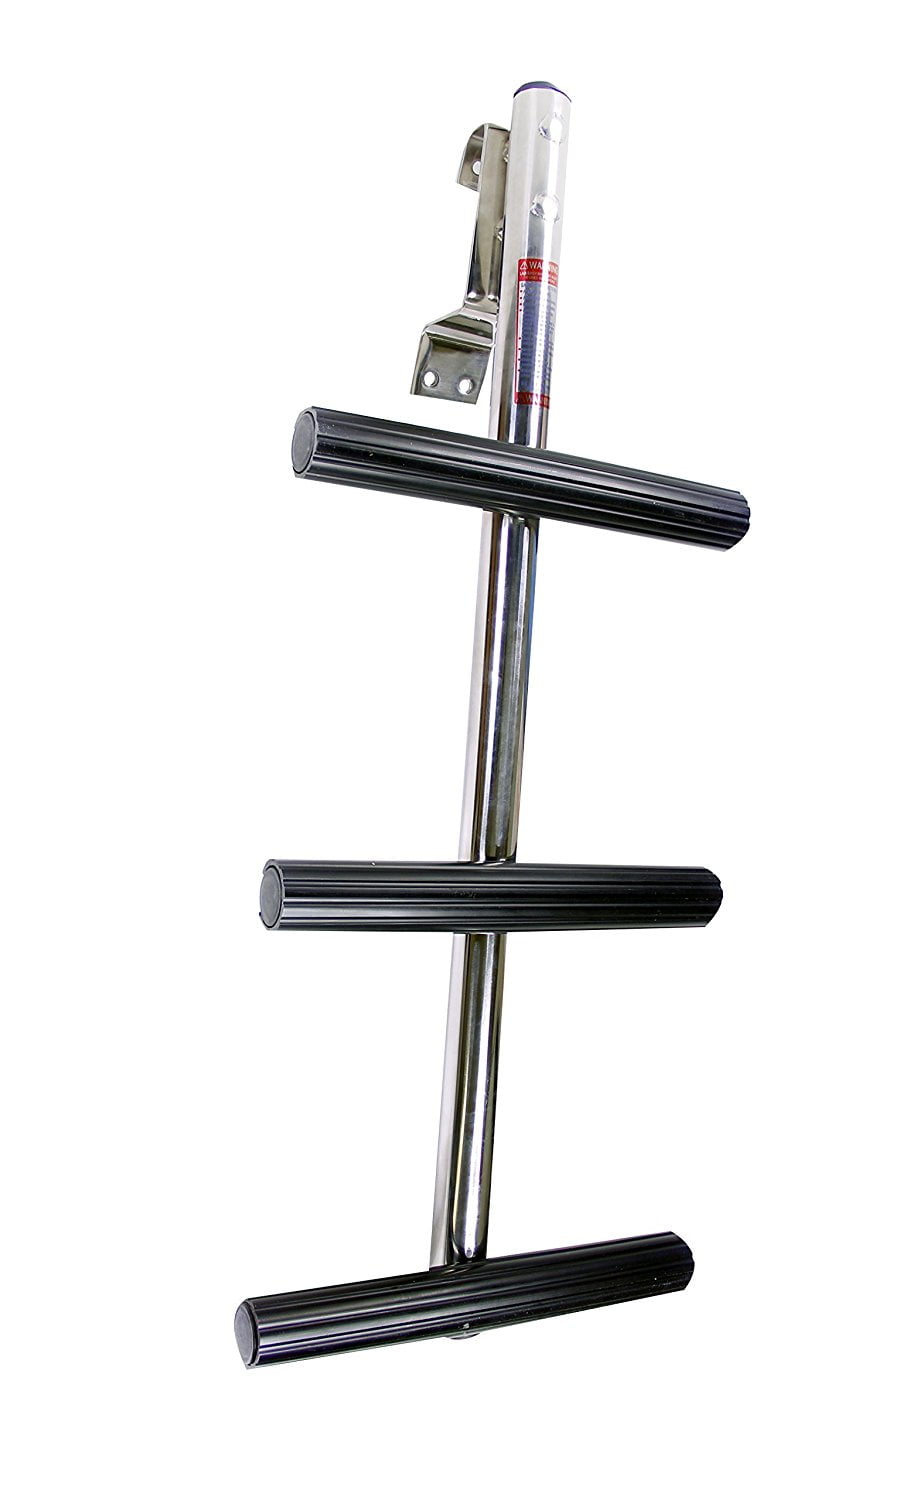 Pactrade Marine Boat 3 Steps Dive Ladder Stainless Steel w/ Non-slip ...